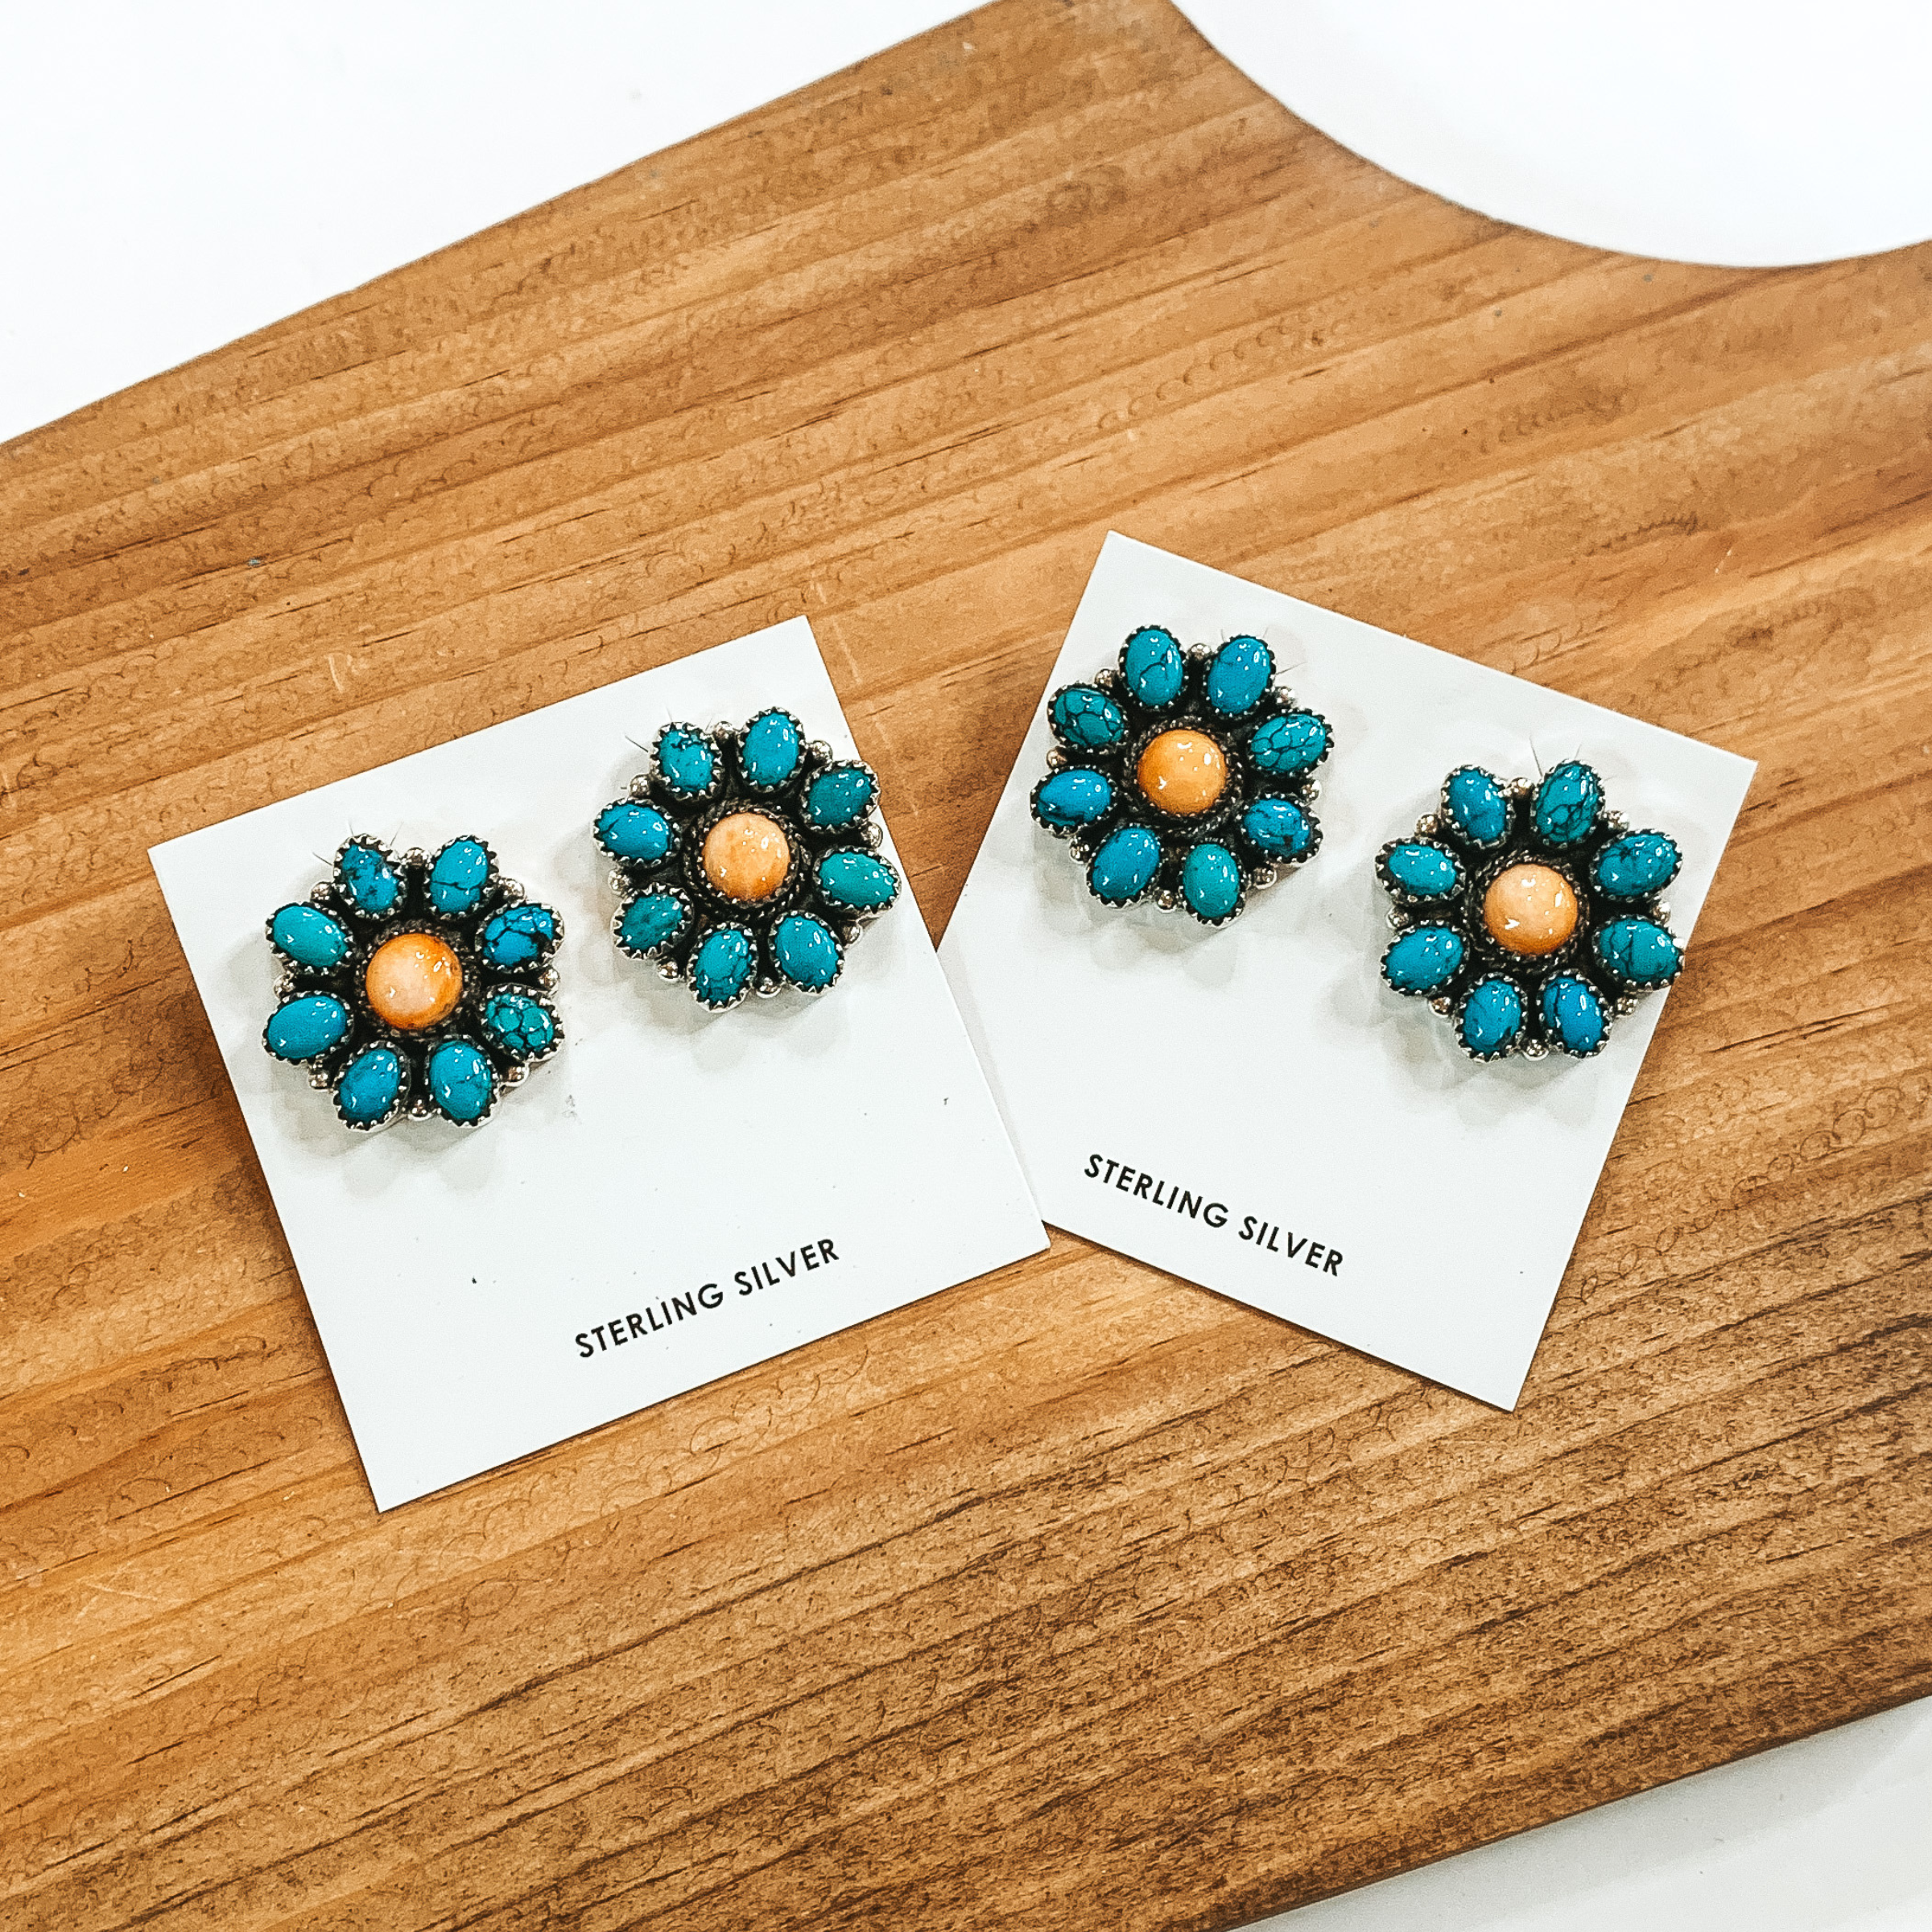 Turquoise stone flower cluster earrings that have an orange center stone. There are two pairs of these earrings pictured on a wood block on a white background. 